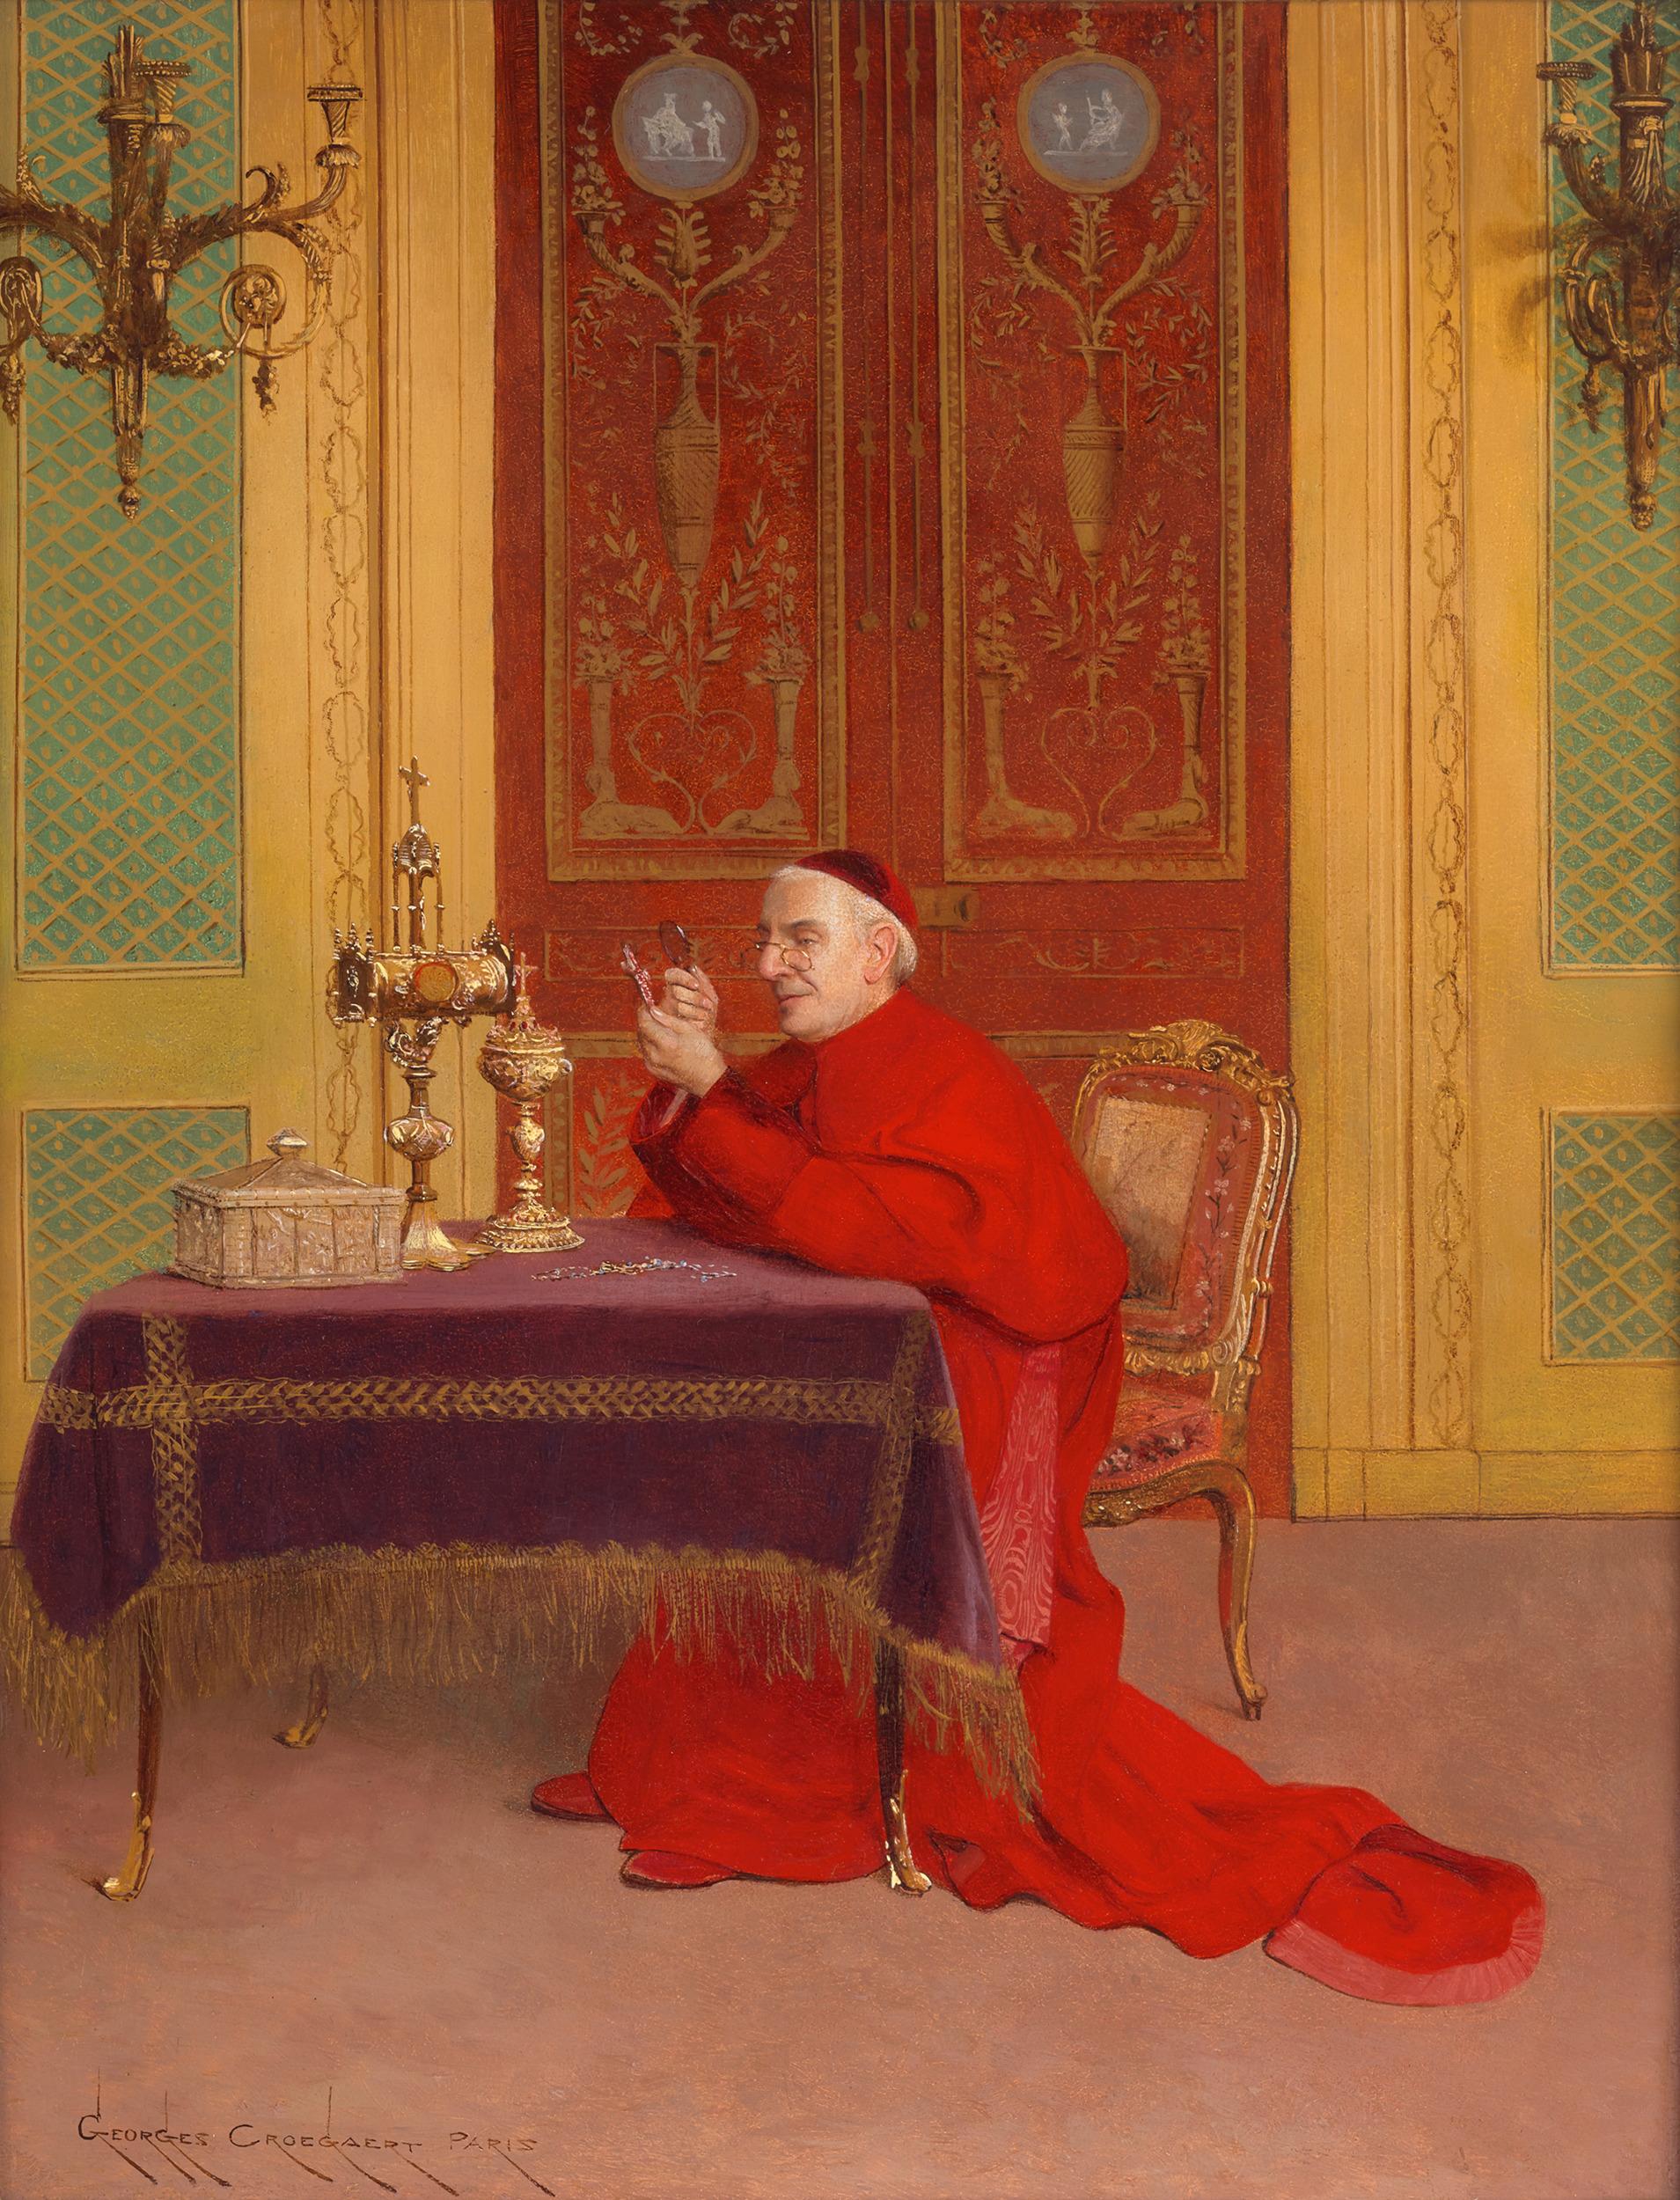 Georges Croegaert
1848-1923  Belgian

The Connoisseur

Signed "Georges Croegaert Paris" (lower right)
Oil on panel

A Cardinal peers through a magnifying glass at gilded treasures in this exceptional oil on panel by Belgian artist Georges Croegaert.